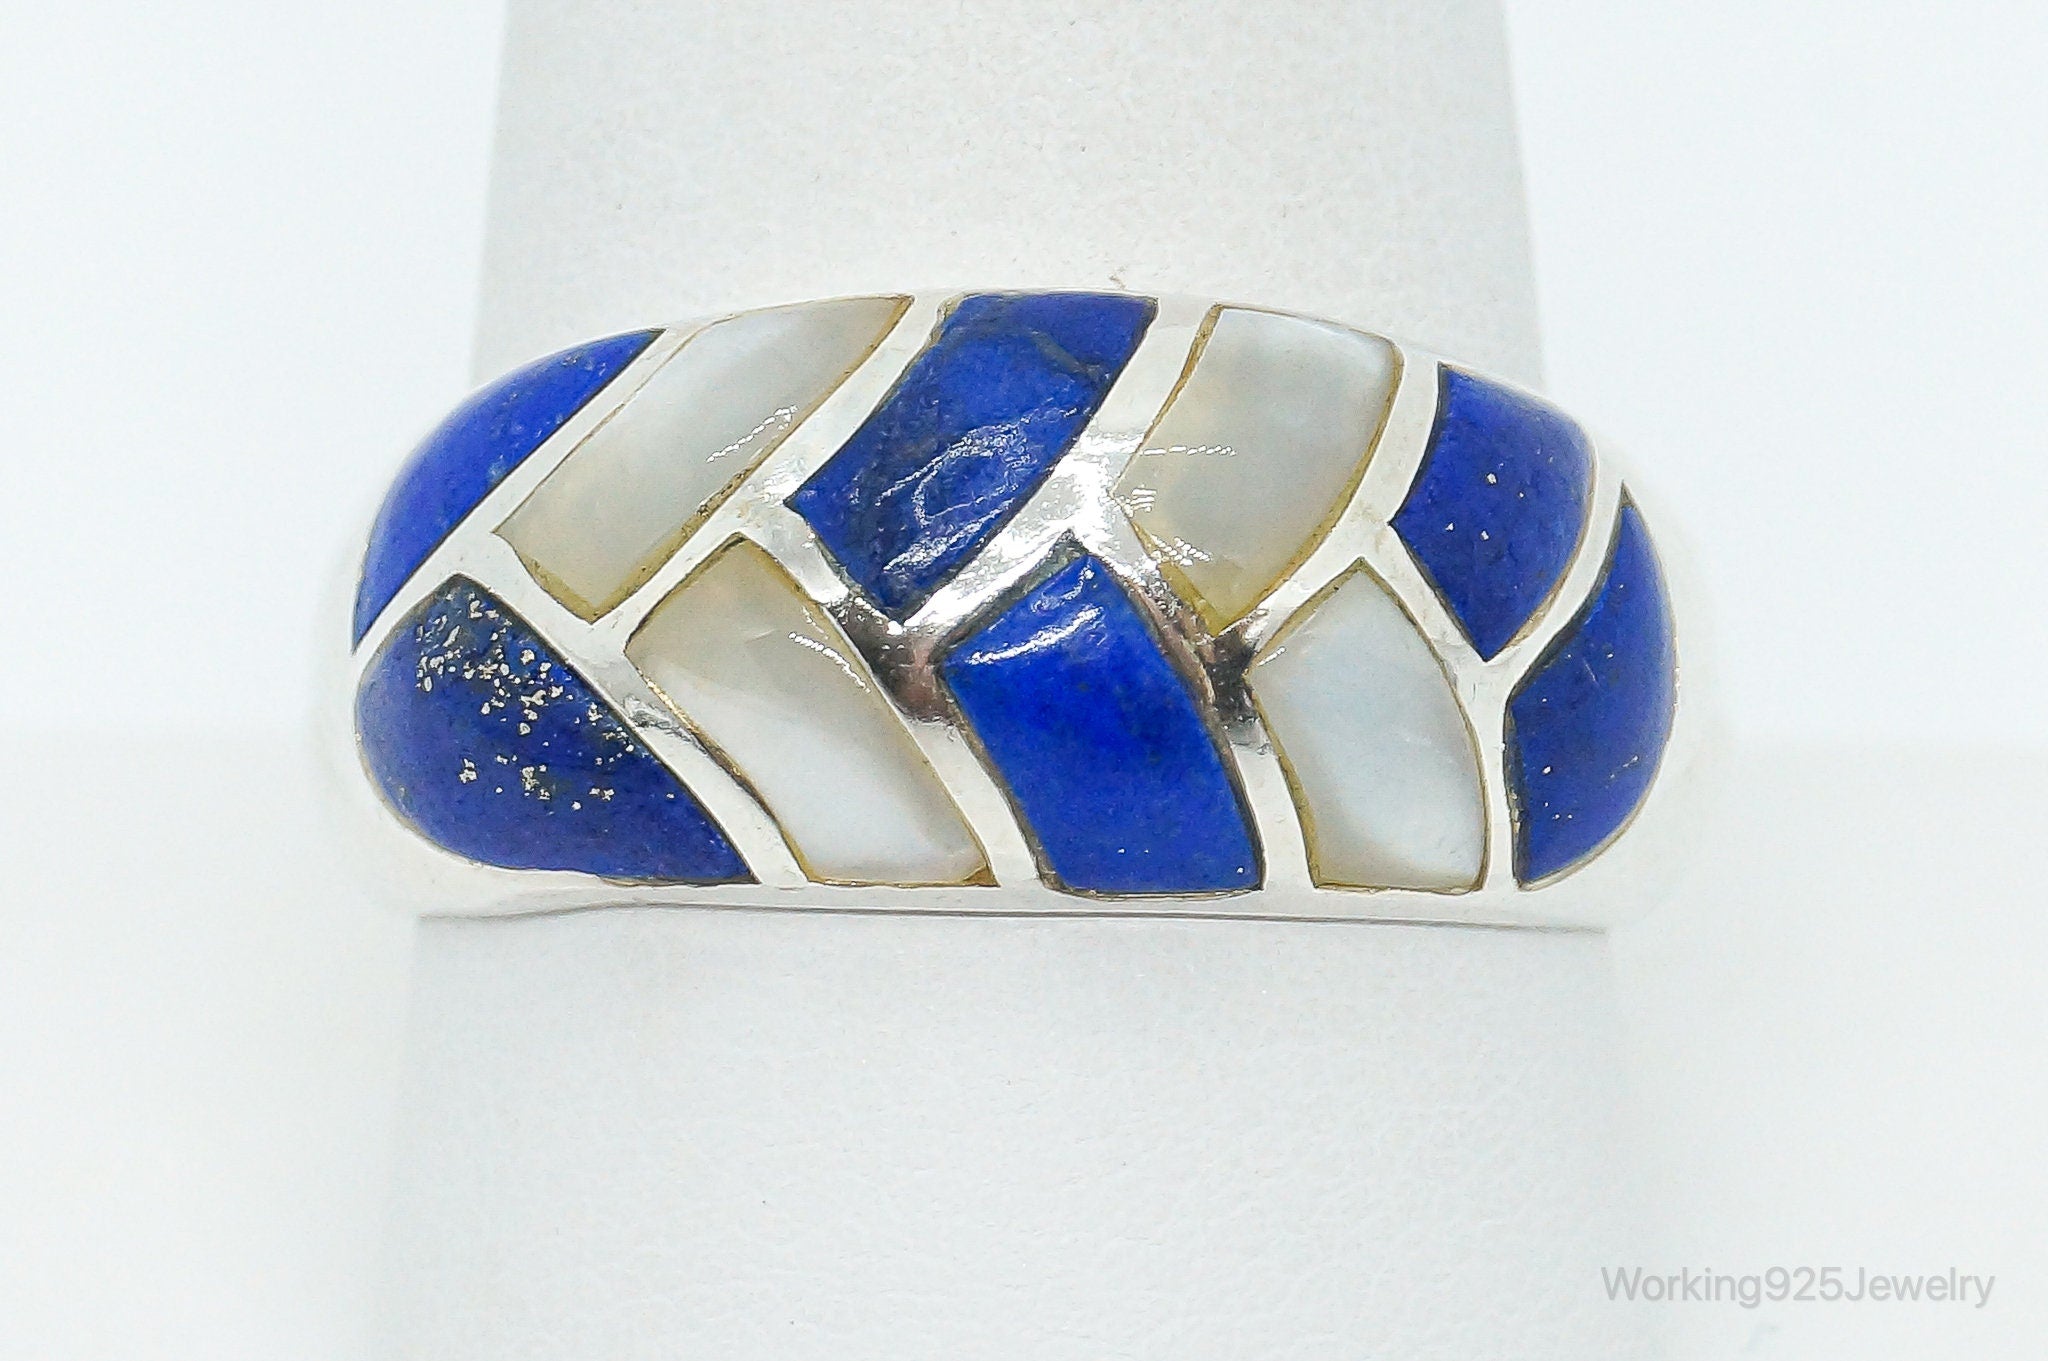 Designer S & G Lapis Lazuli Mother Of Pearl Sterling Silver Ring SZ 10.25